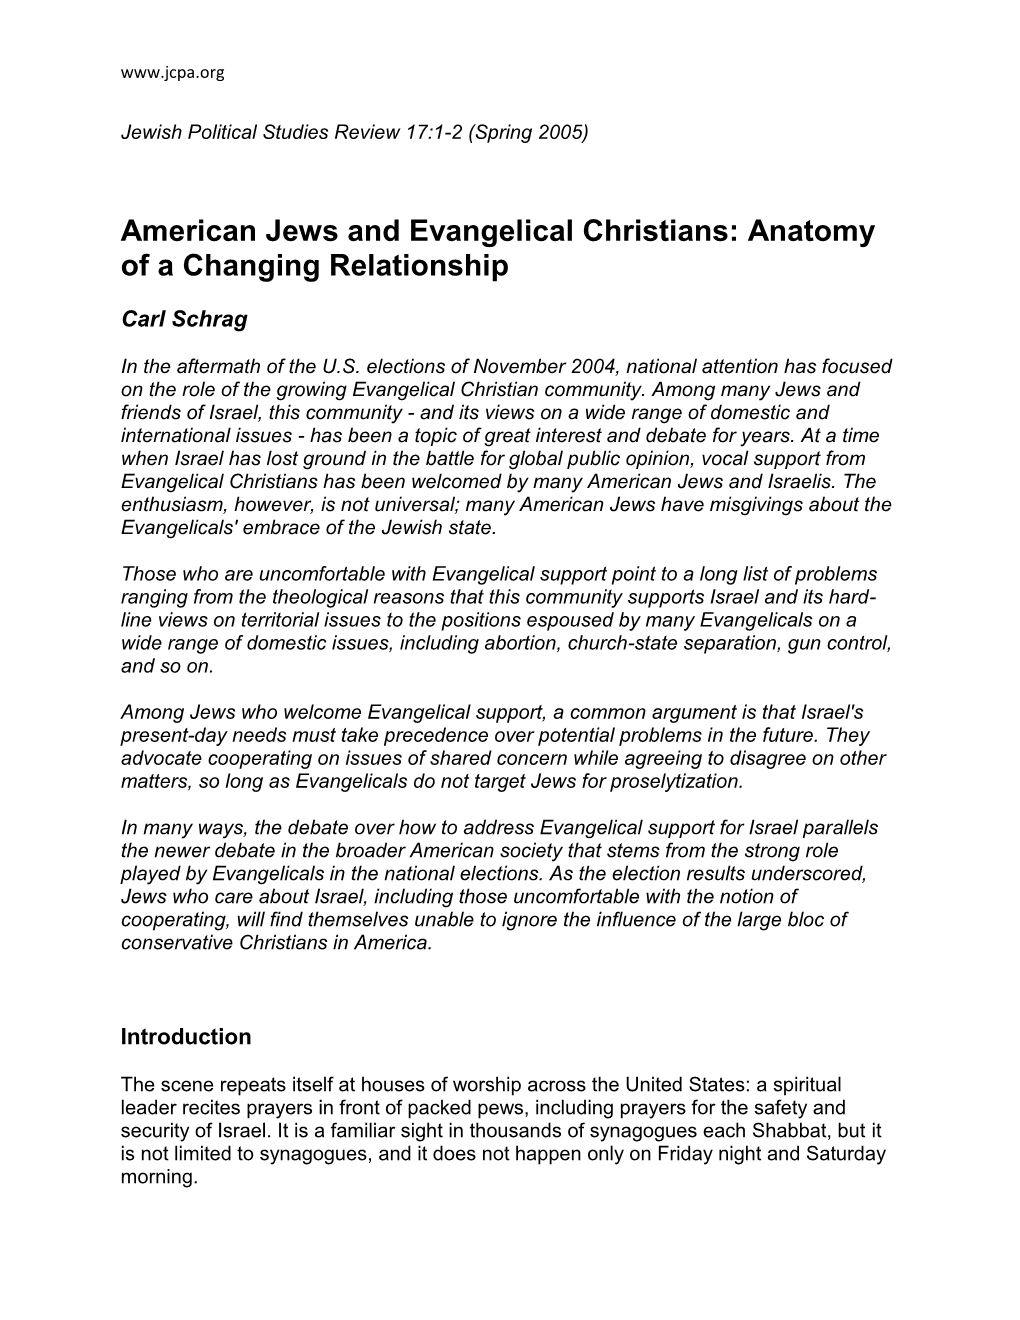 American Jews and Evangelical Christians: Anatomy of a Changing Relationship